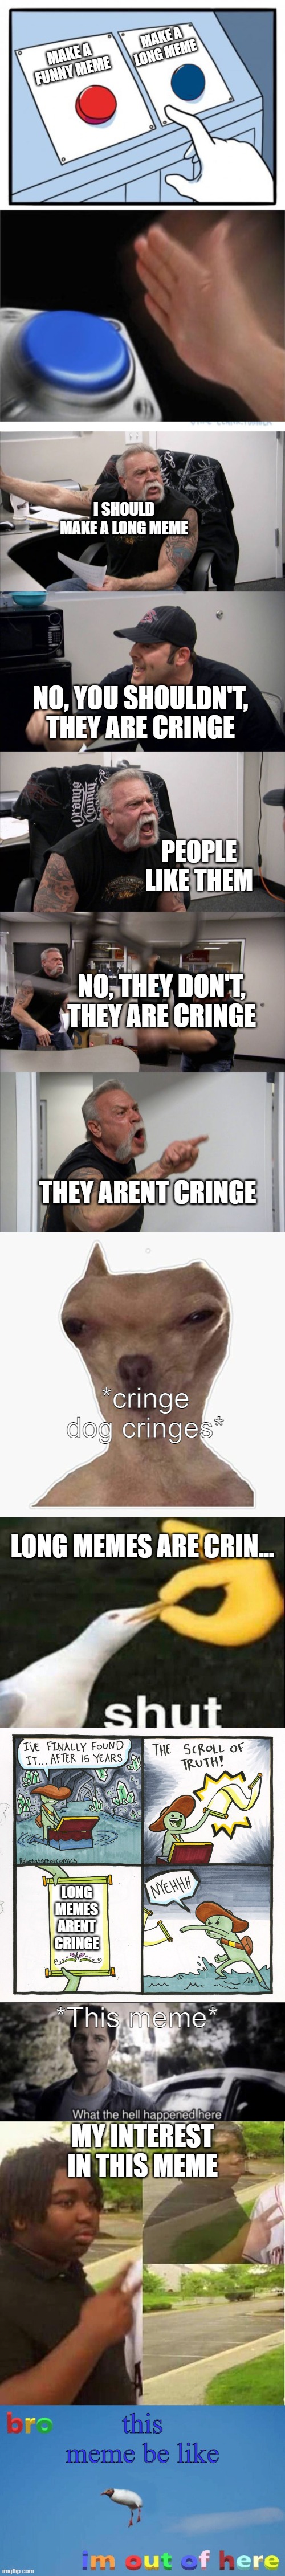 MAKE A LONG MEME; MAKE A FUNNY MEME; I SHOULD MAKE A LONG MEME; NO, YOU SHOULDN'T, THEY ARE CRINGE; PEOPLE LIKE THEM; NO, THEY DON'T, THEY ARE CRINGE; THEY ARENT CRINGE; *cringe dog cringes*; LONG MEMES ARE CRIN... LONG MEMES ARENT CRINGE; *This meme*; MY INTEREST IN THIS MEME; this meme be like | image tagged in two buttons 1 blue,memes,american chopper argument,cringe dog,the scroll of truth,long meme | made w/ Imgflip meme maker